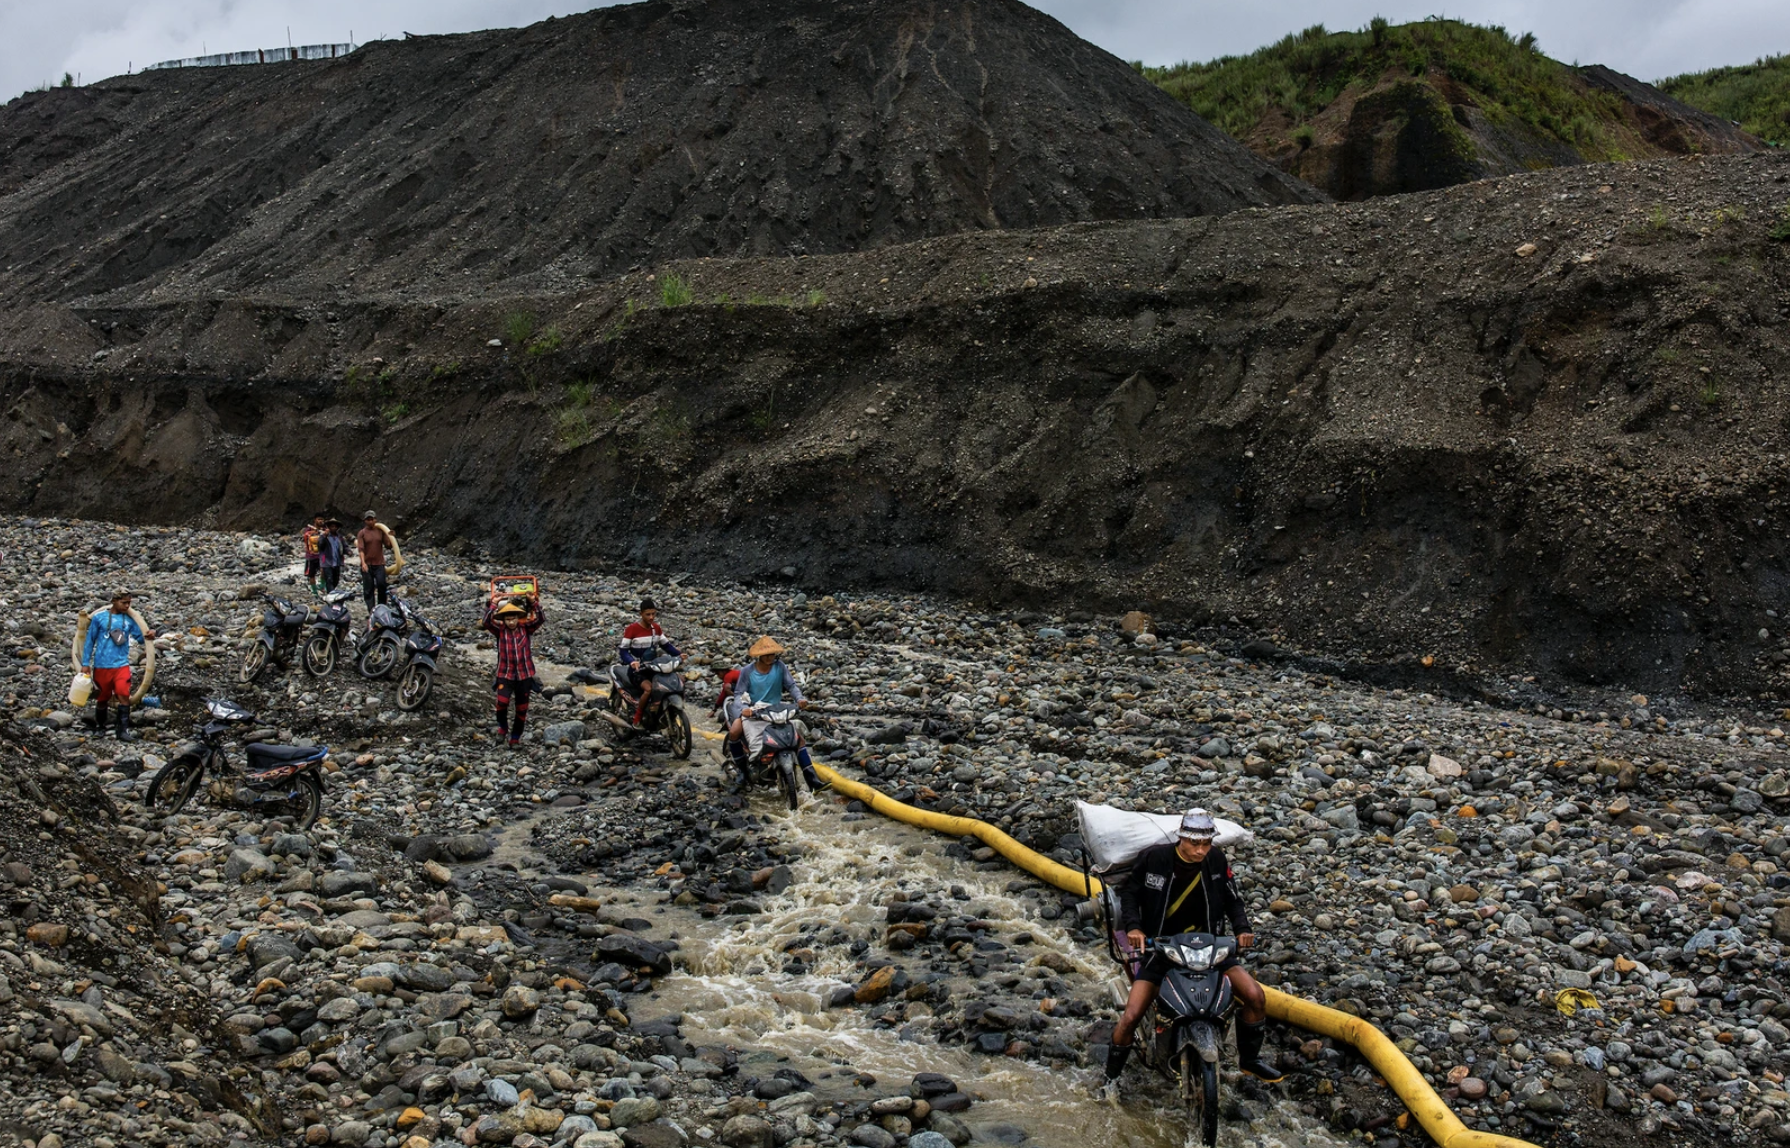 Freelance miners on their way to search for jade in Hpakant, Kachin State, Myanmar on July 14, 2020. Image by Hkun Lat. Myanmar, 2020.